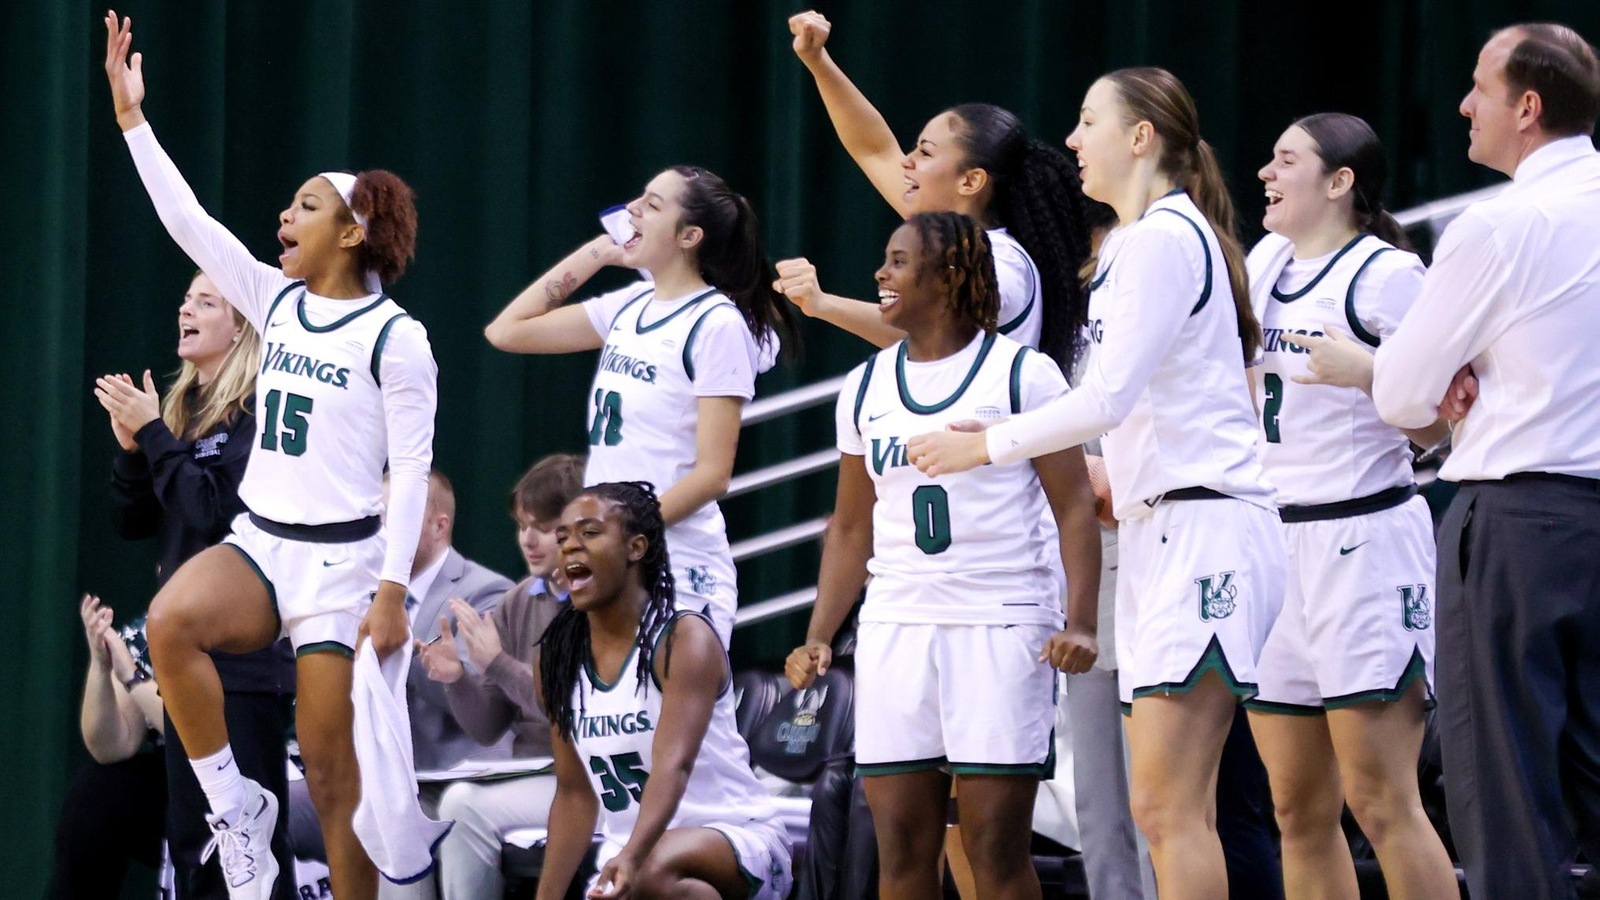 Cleveland State Women's Basketball Returns To Non-League Play At Central Michigan Thursday